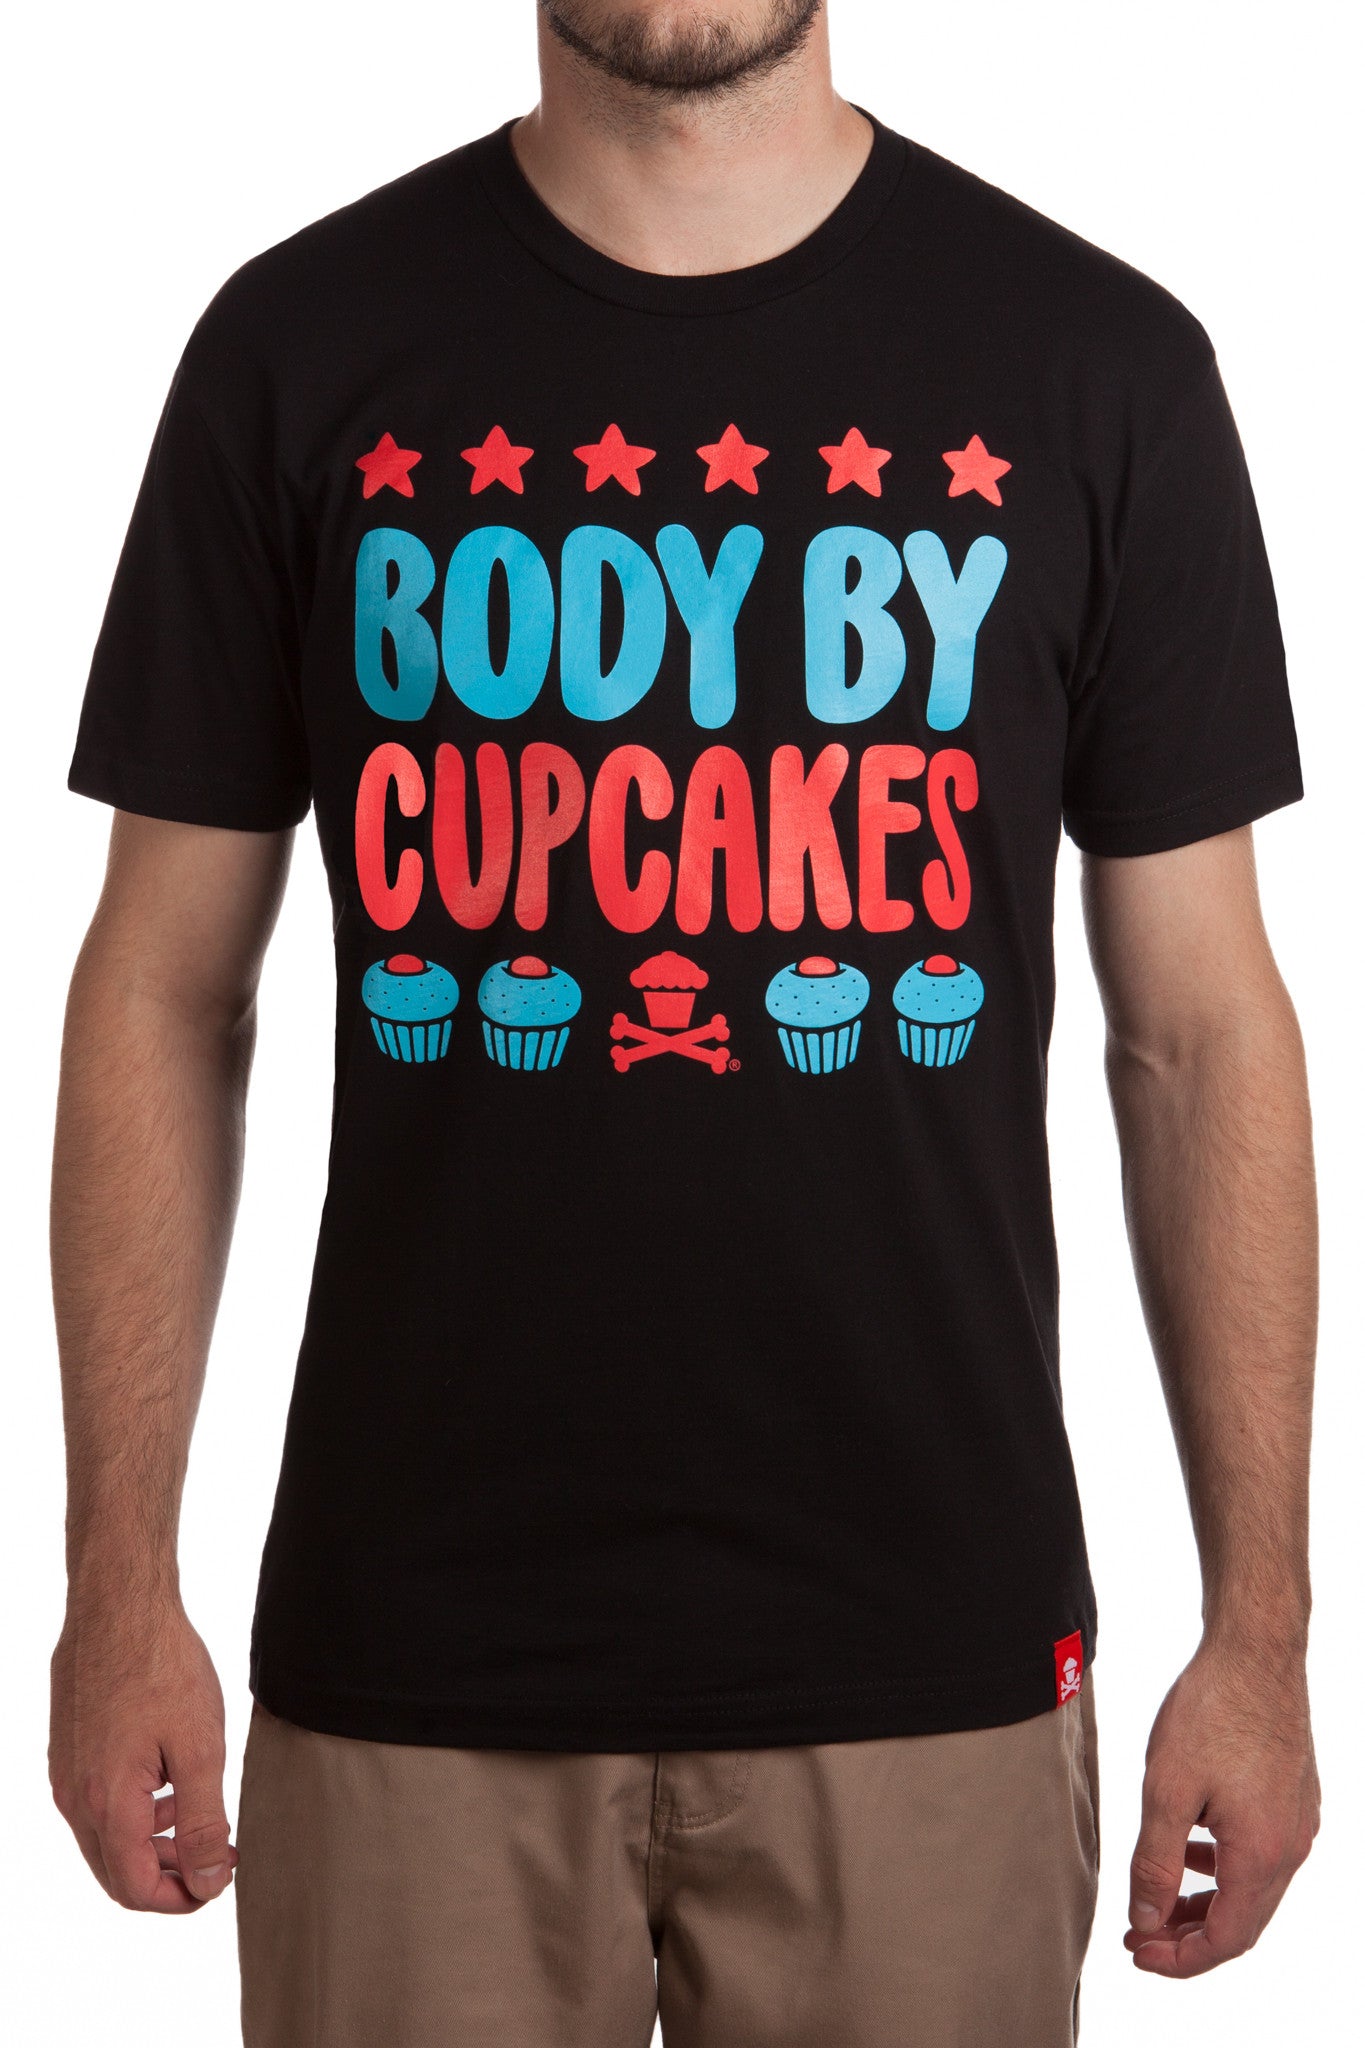 JC Vault - Adult Medium - Body By Cupcakes (Red / Blue)